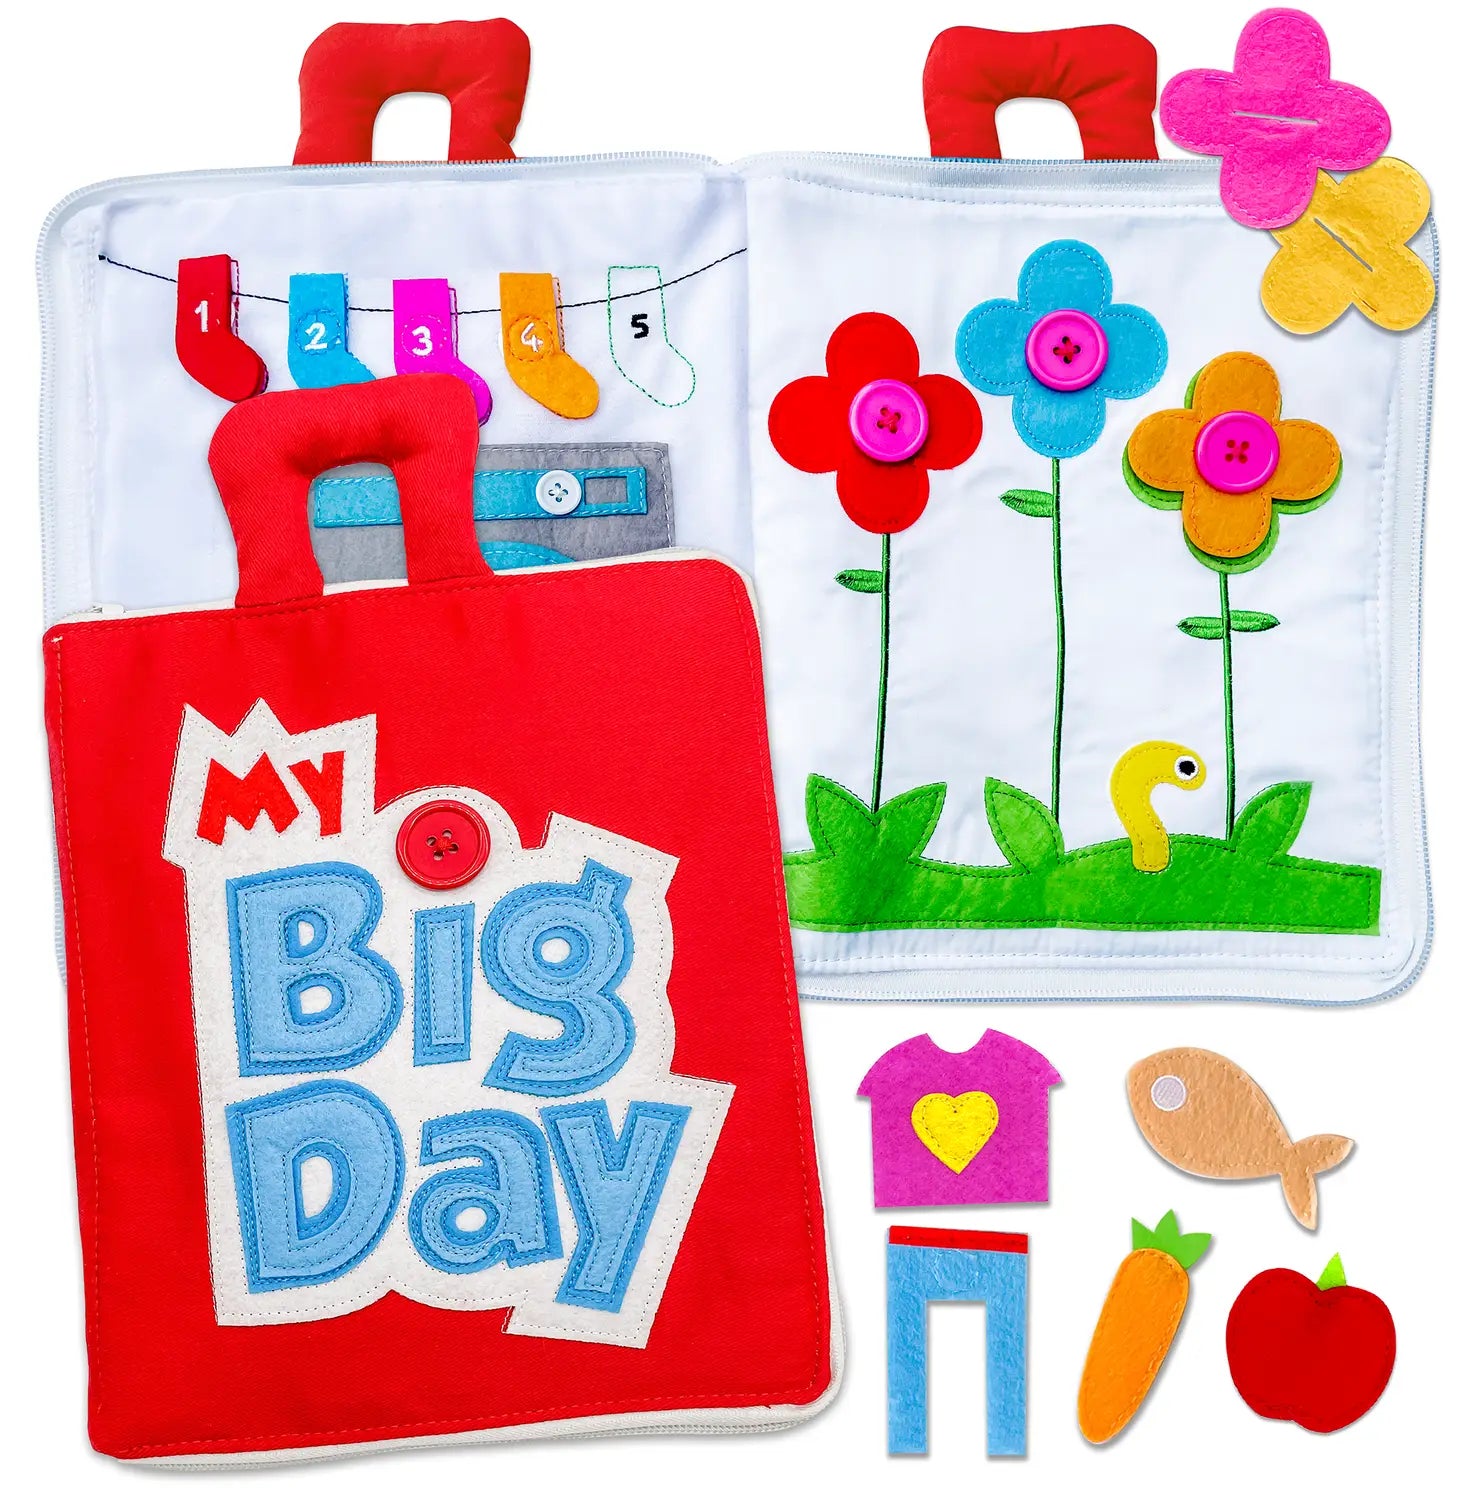 My Big Day- Red- Fabric Activity Book!